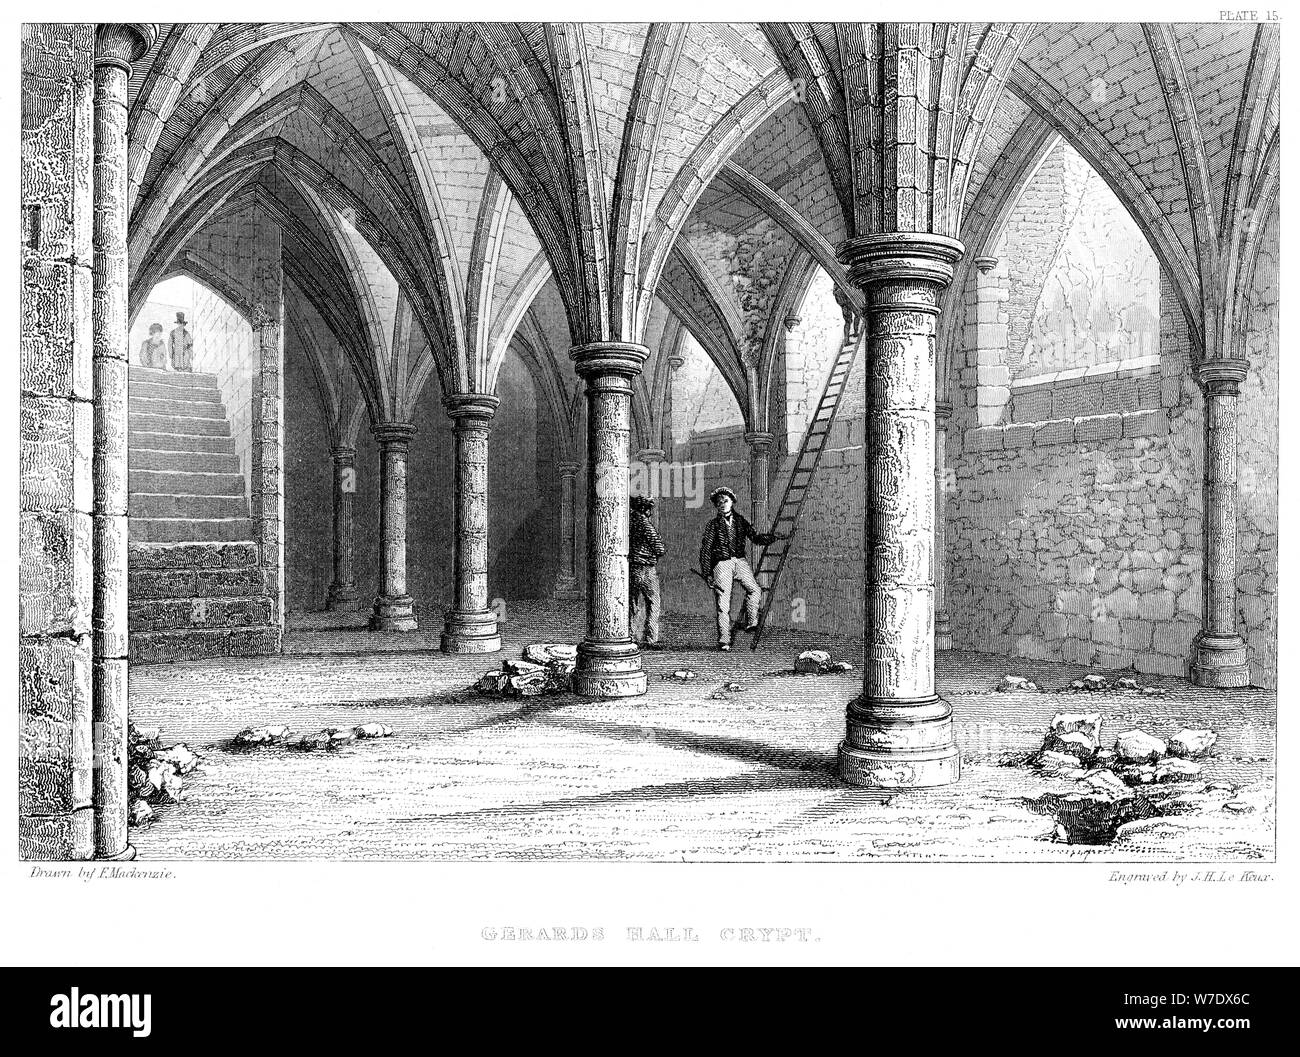 'Gerard's Hall Crypt', City of London, 1886.Artist: JH Le Keux Stock Photo